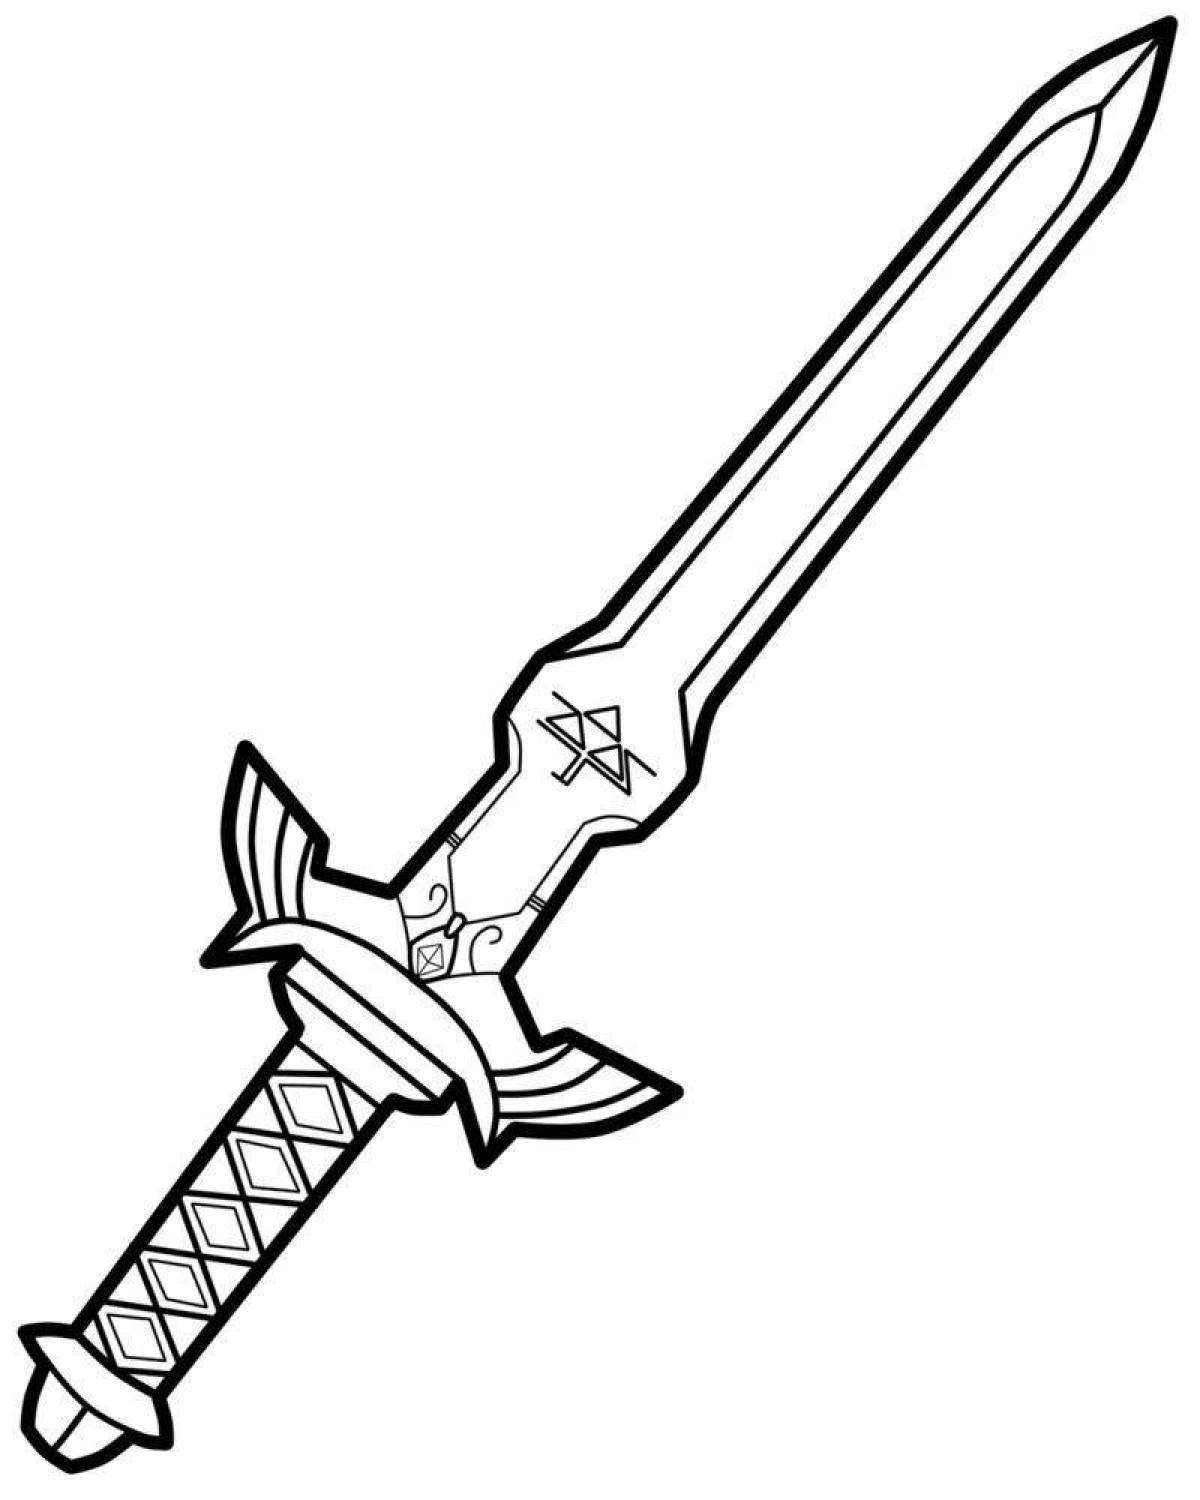 Gorgeous sword coloring book for kids